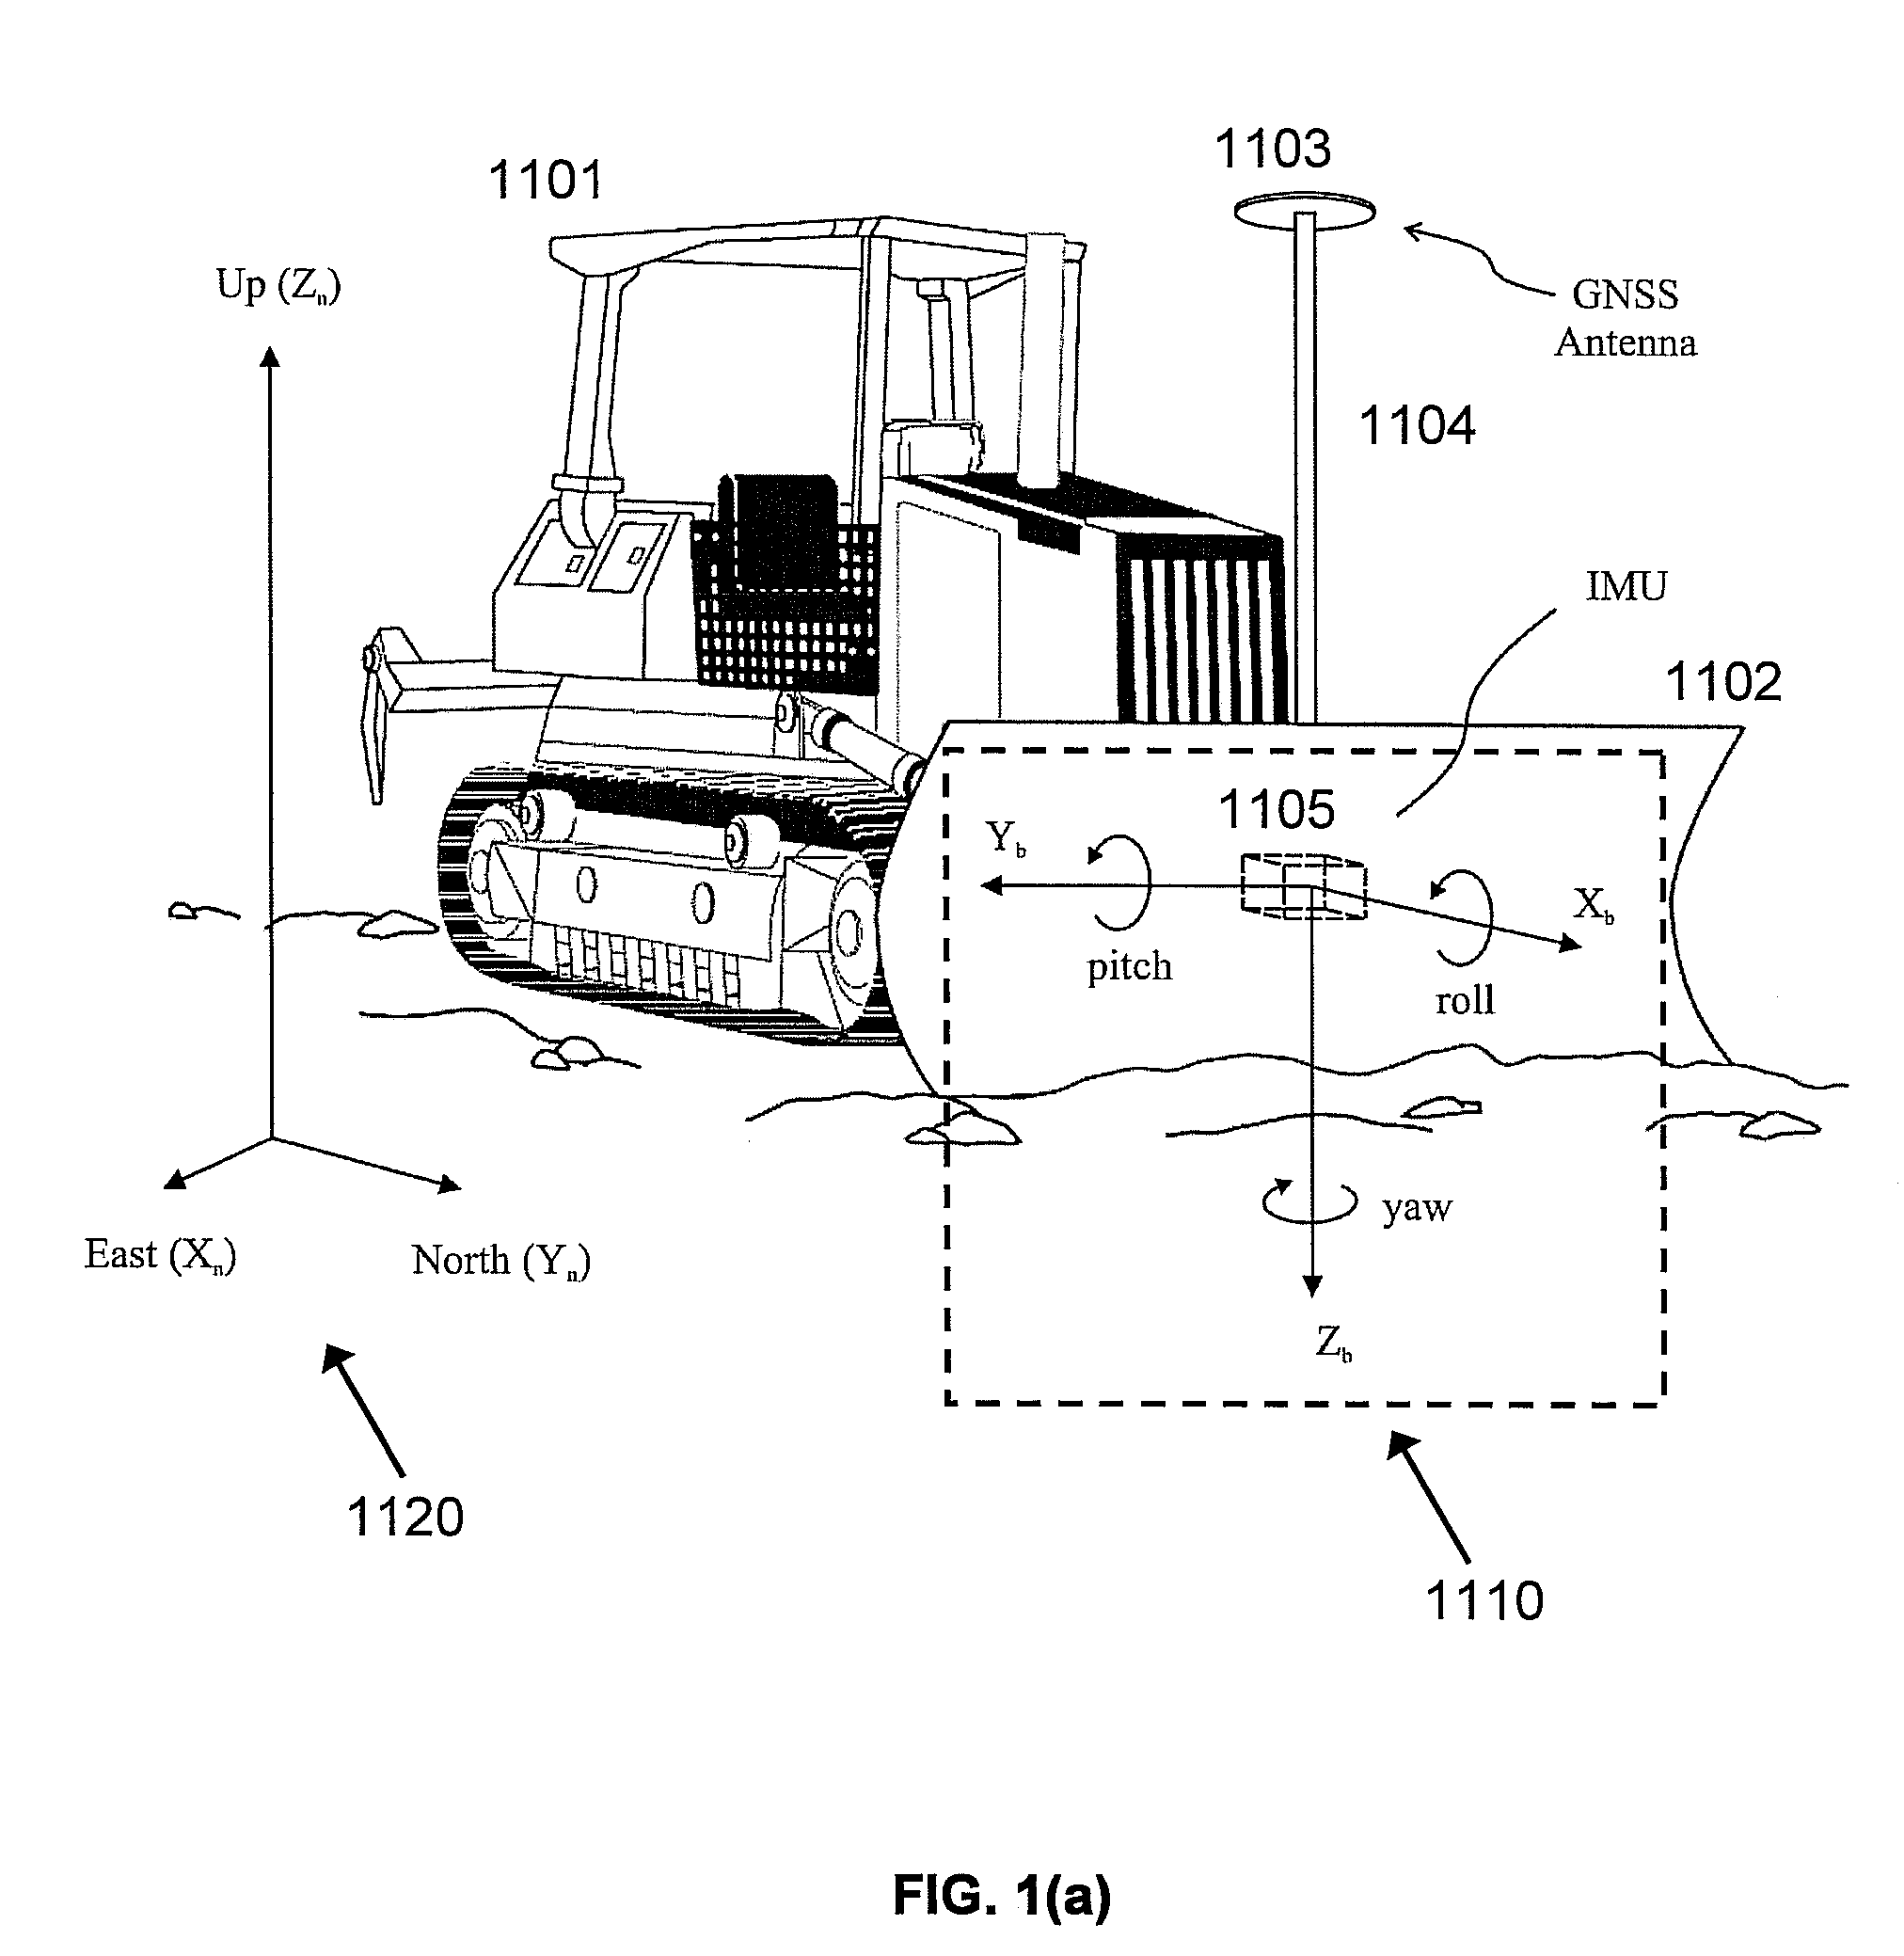 Automatic Blade Control System with Integrated Global Navigation Satellite System and Inertial Sensors